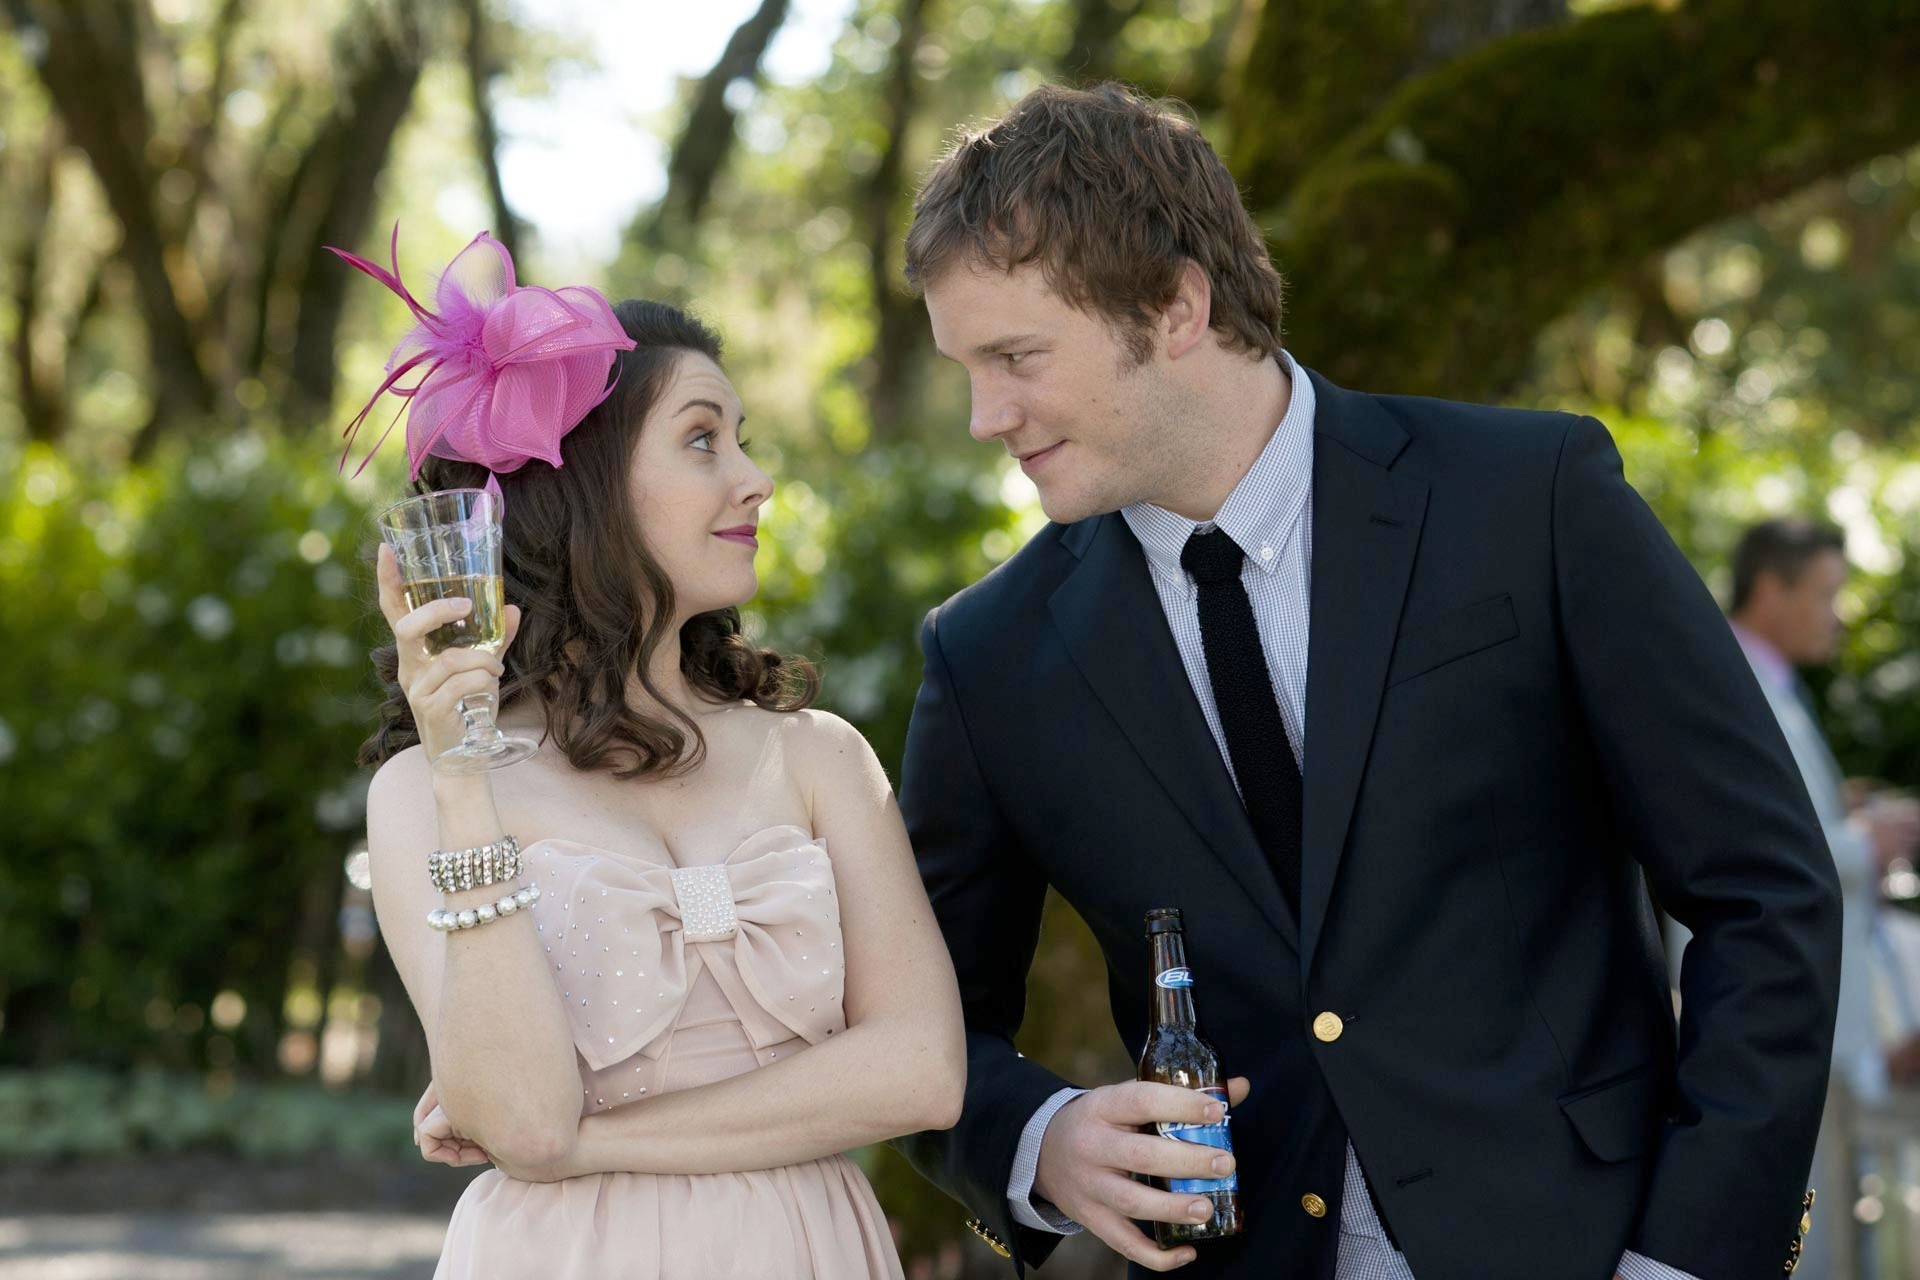 Alison Brie stars as Suzie Barnes-Eilhauer and Chris Pratt stars as Alex Eilhauer in Universal Pictures' The Five-Year Engagement (2012)